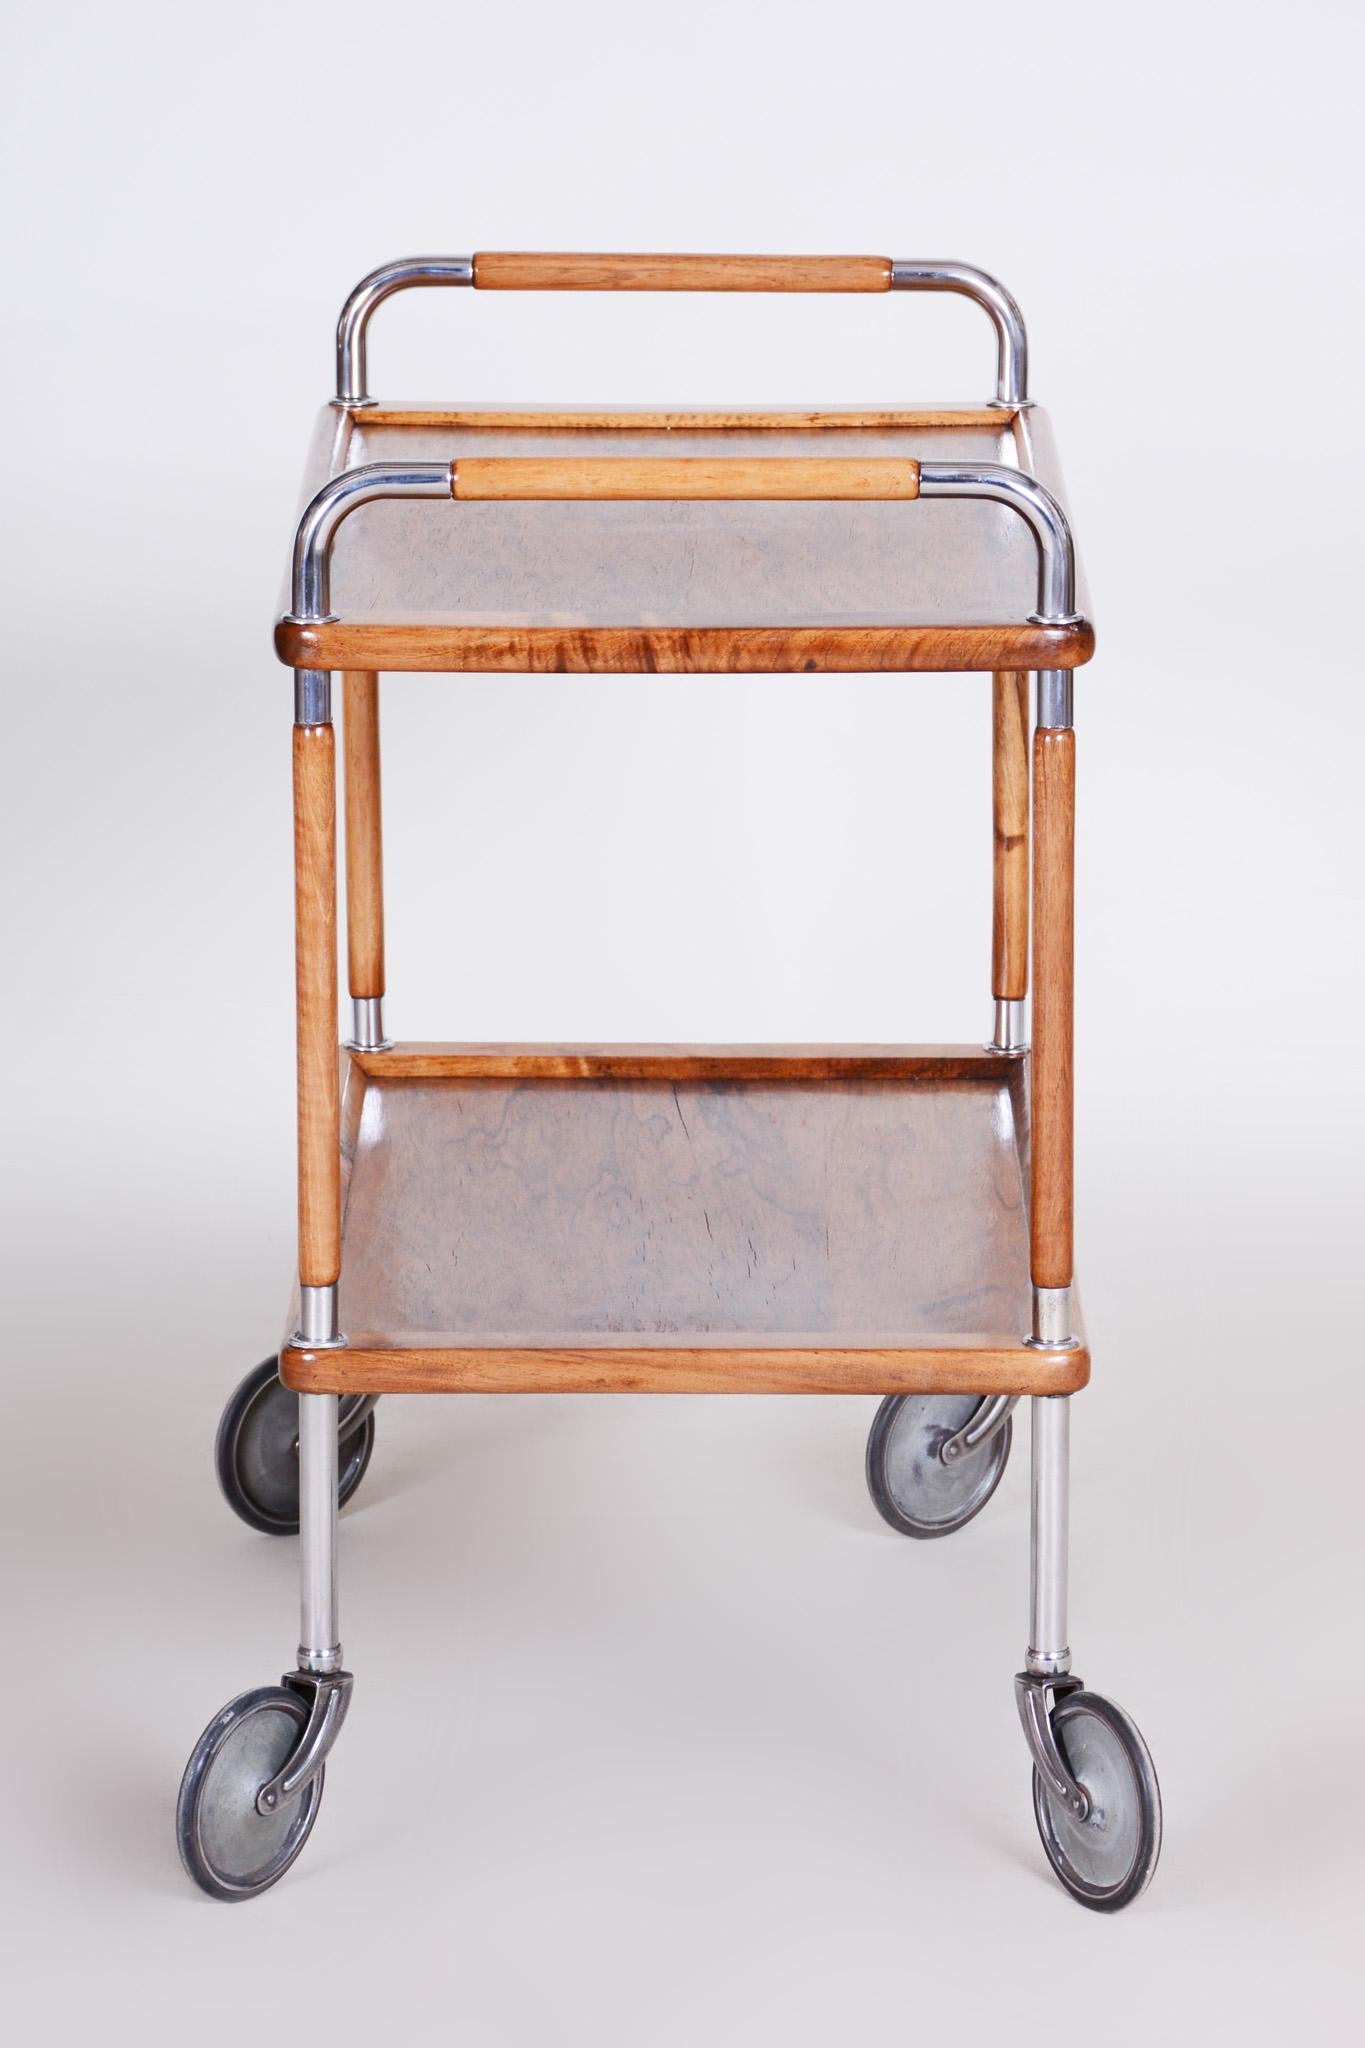 Restored Art Deco Serving Trolley Made in the 1930s by Thonet, Walnut and Steel For Sale 6